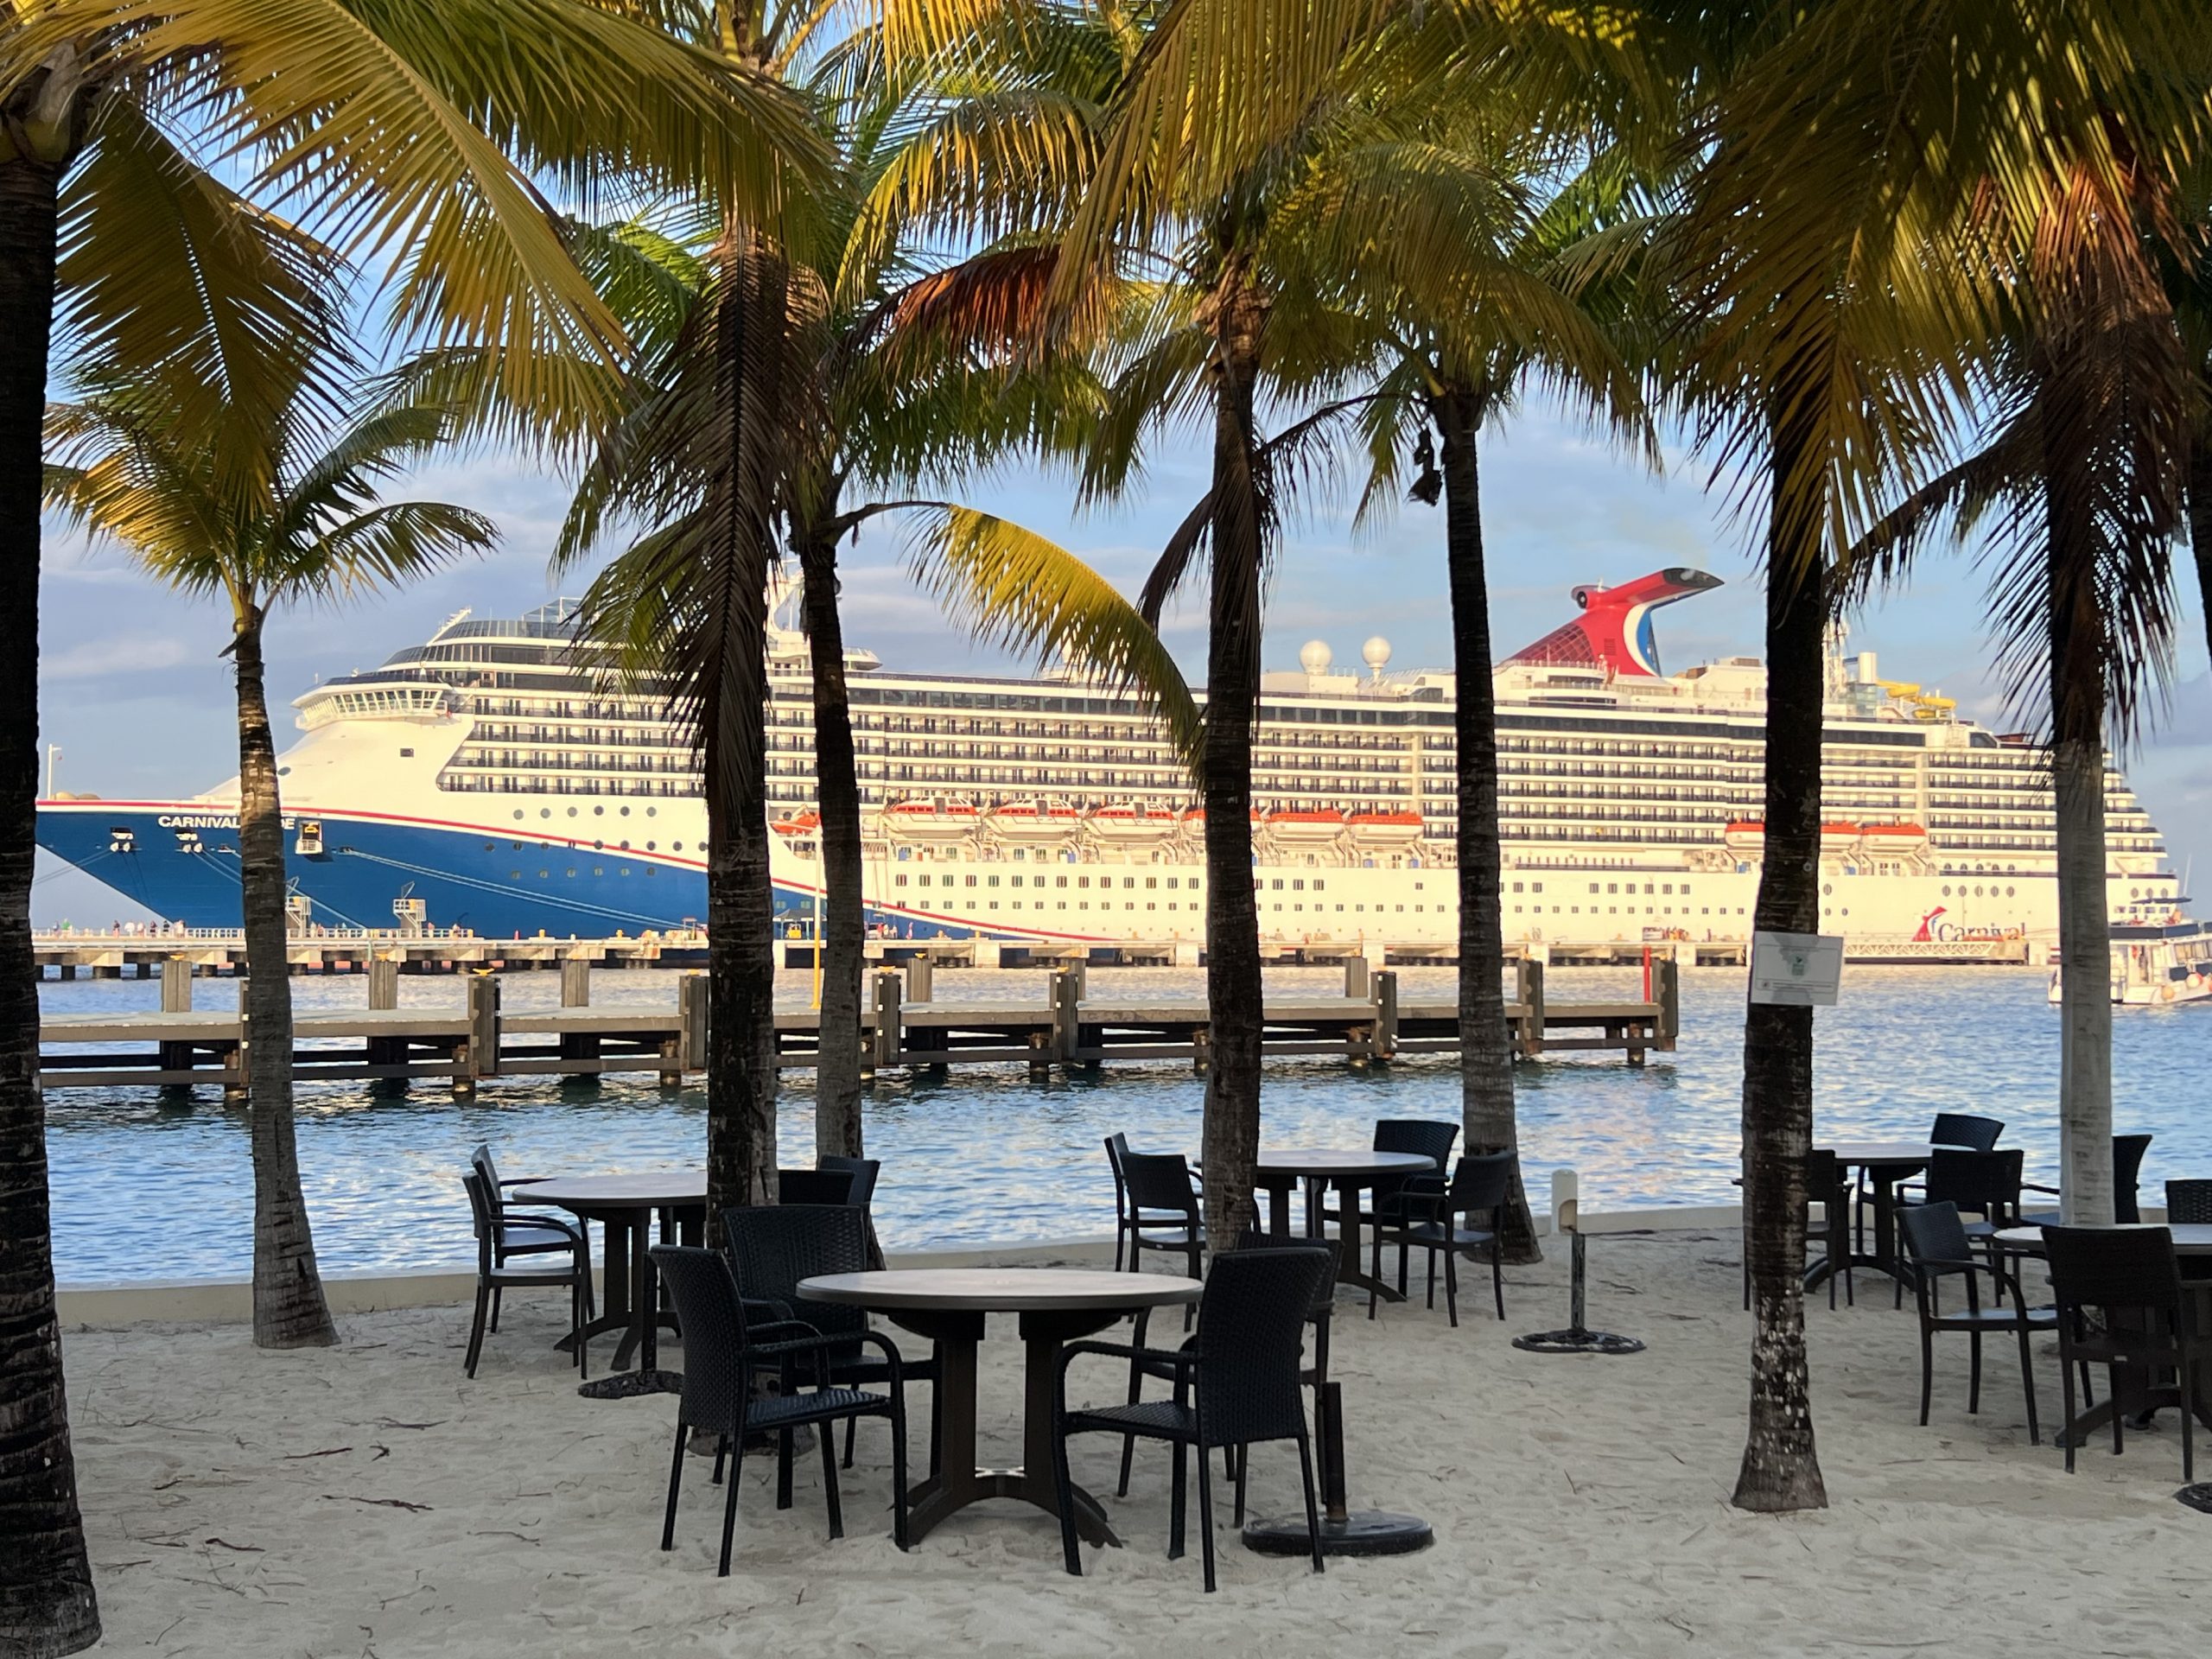 Cruise Ports - Guide to the Cozumel Mexico Cruise Port